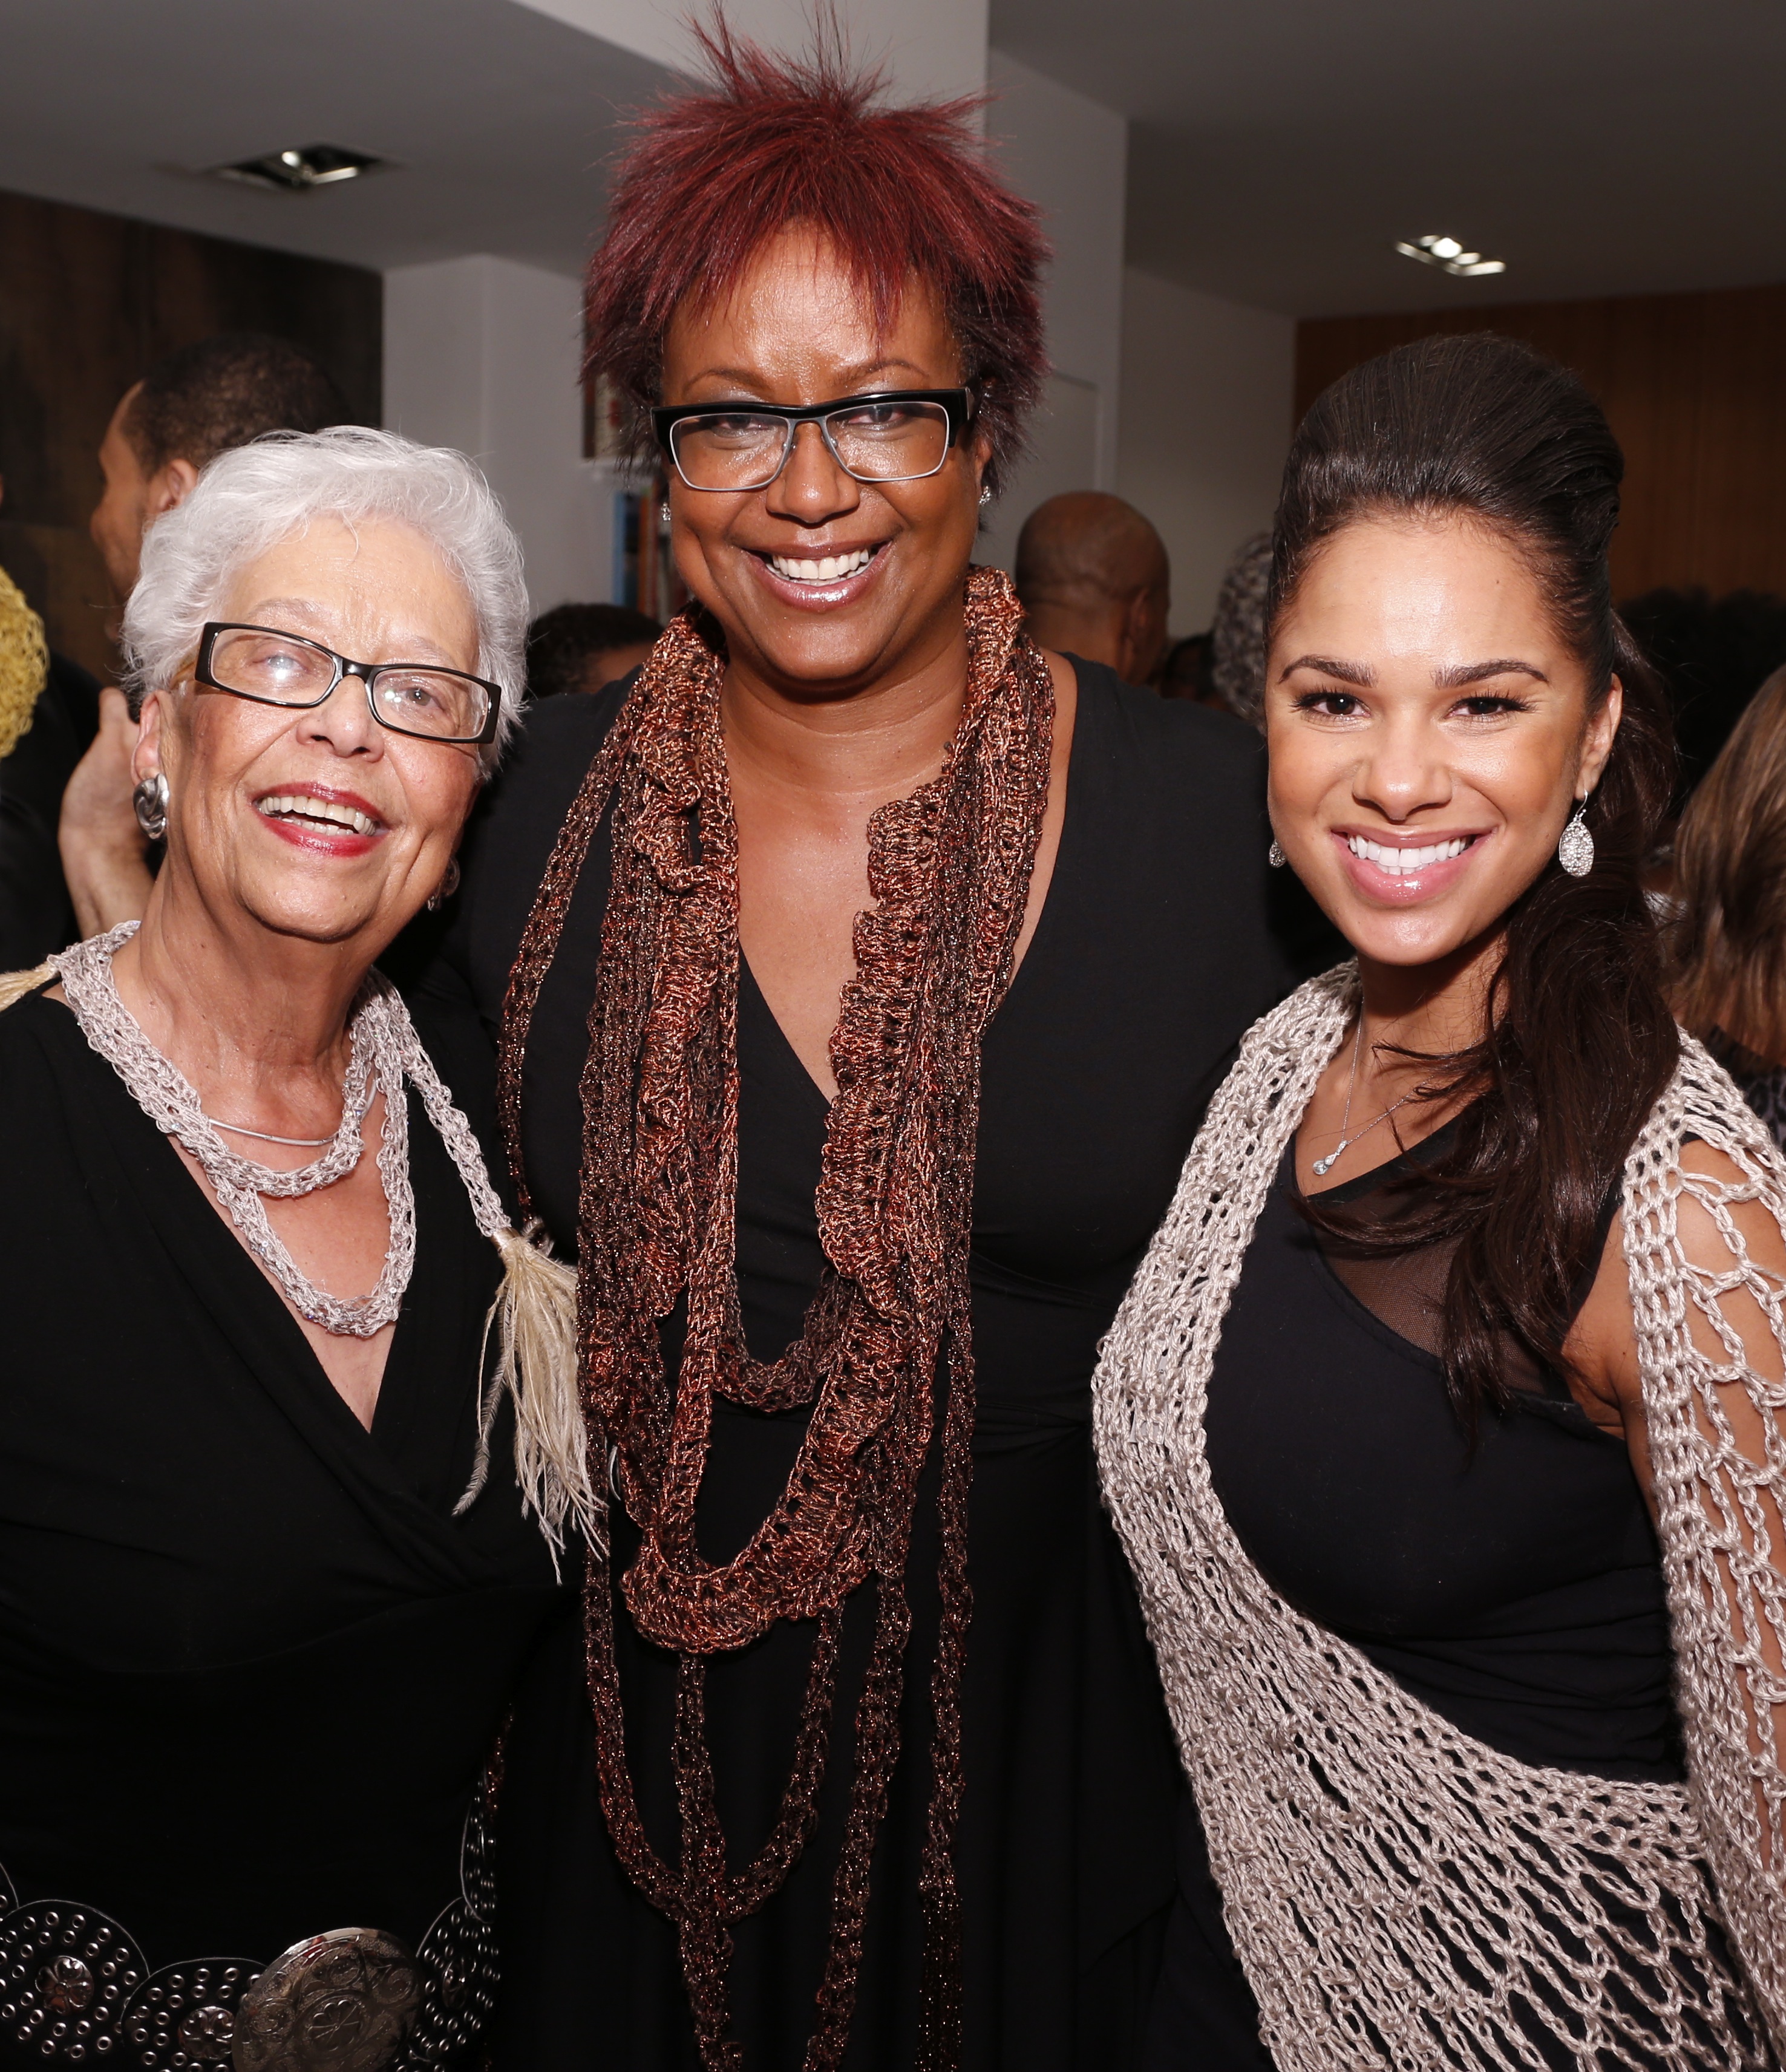  - Harriette-Cole-with-her-mother-and-Misty-Copeland